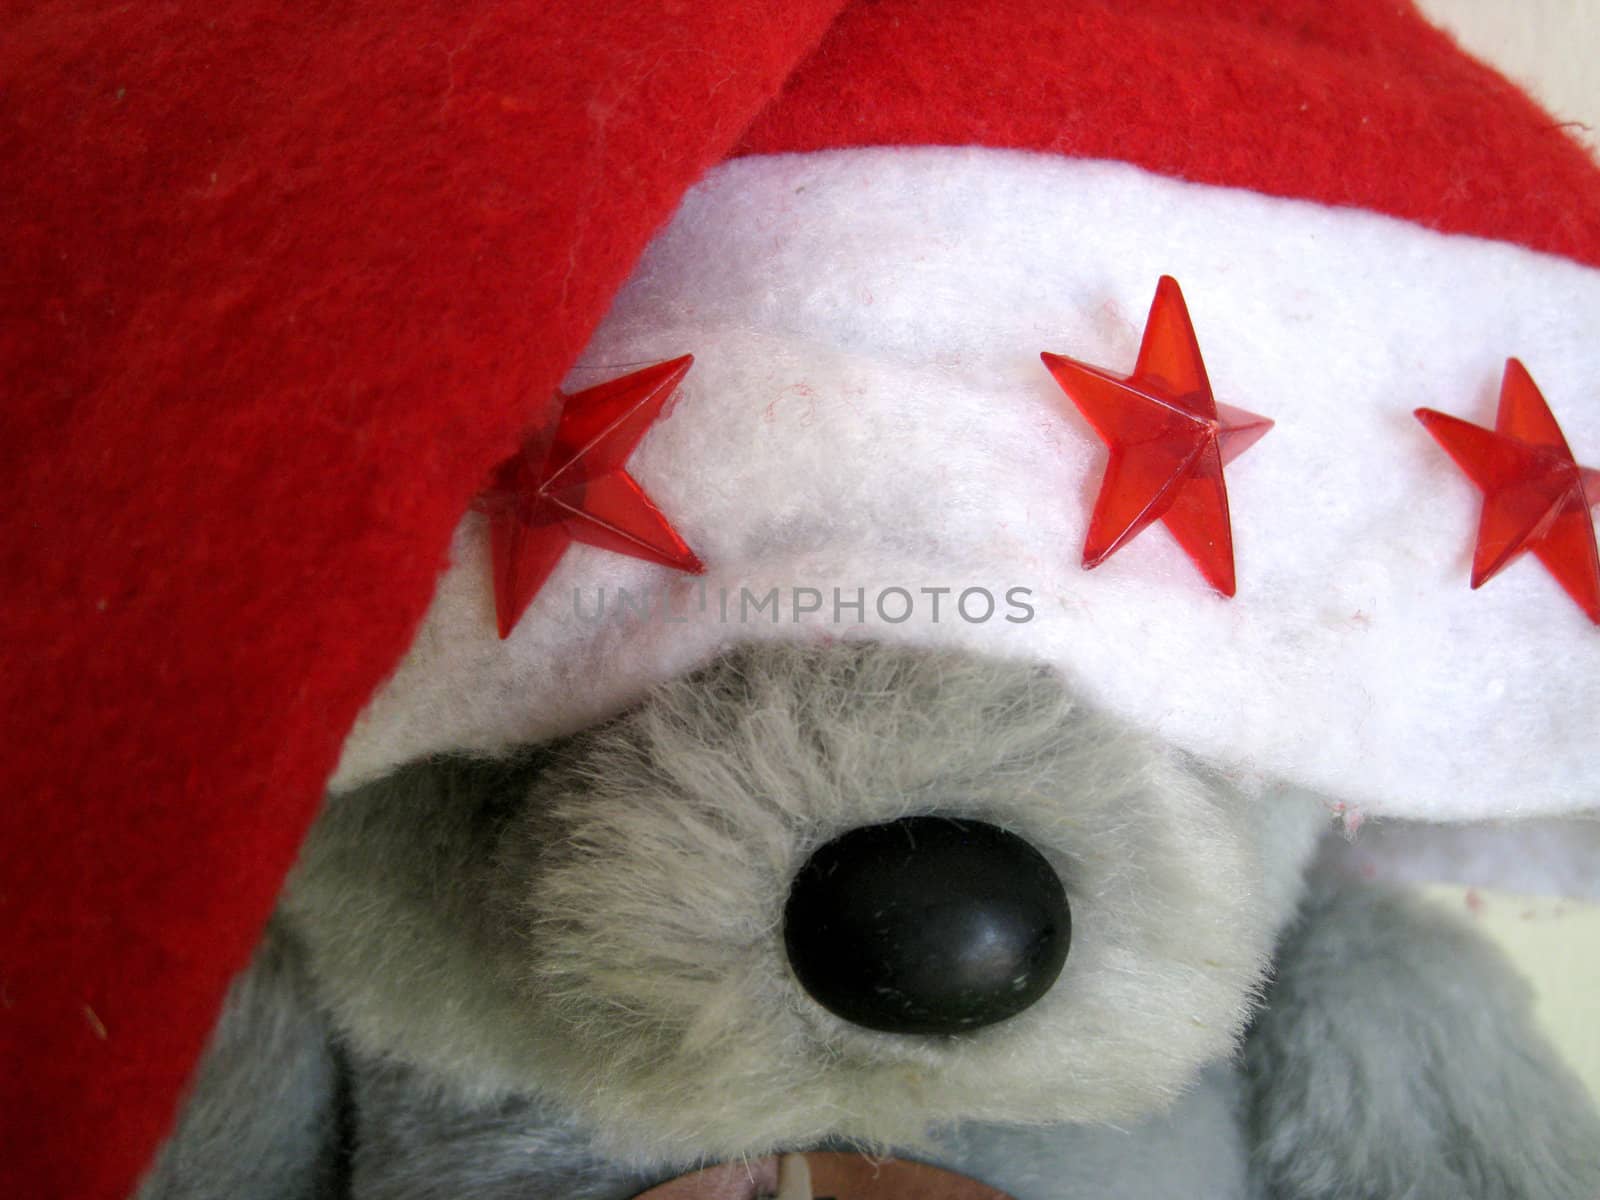 a bear cover it's eye with a Santa hat.